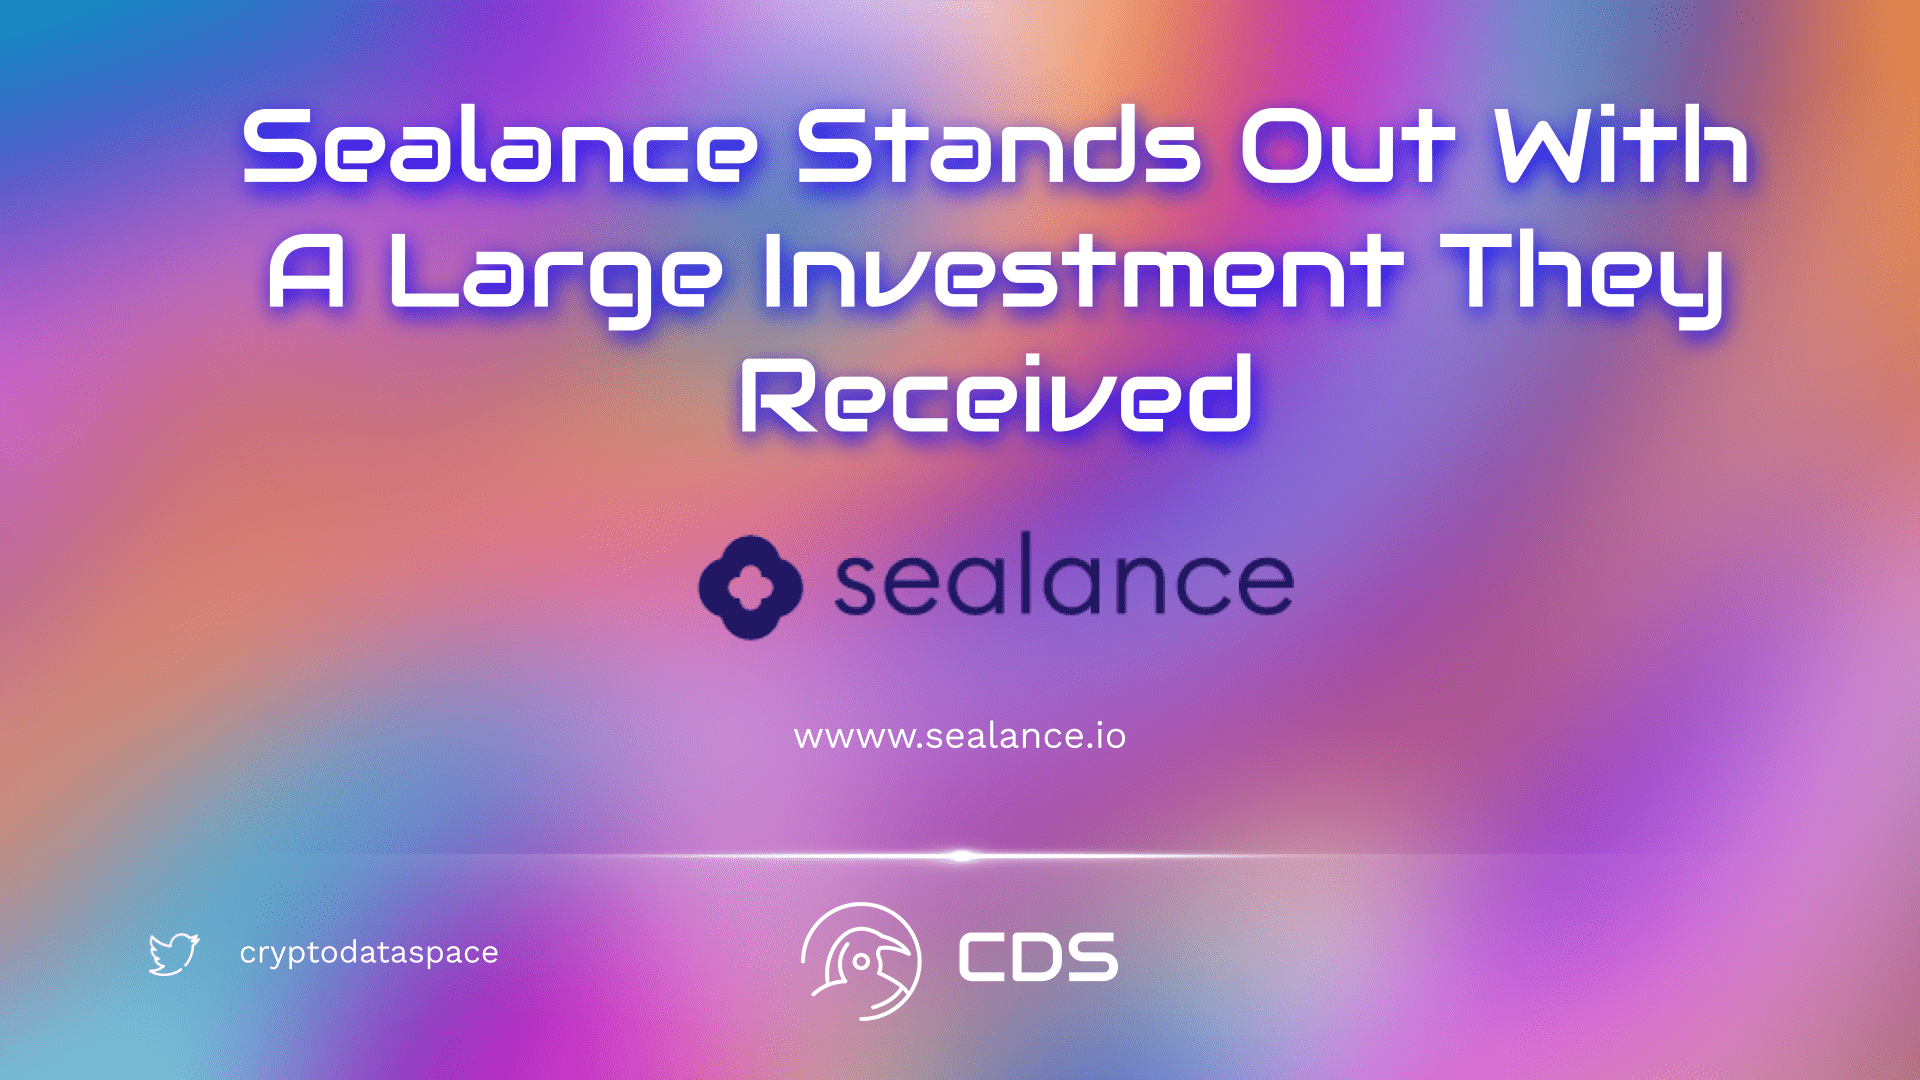 Sealance Stands Out With A Large Investment They Received